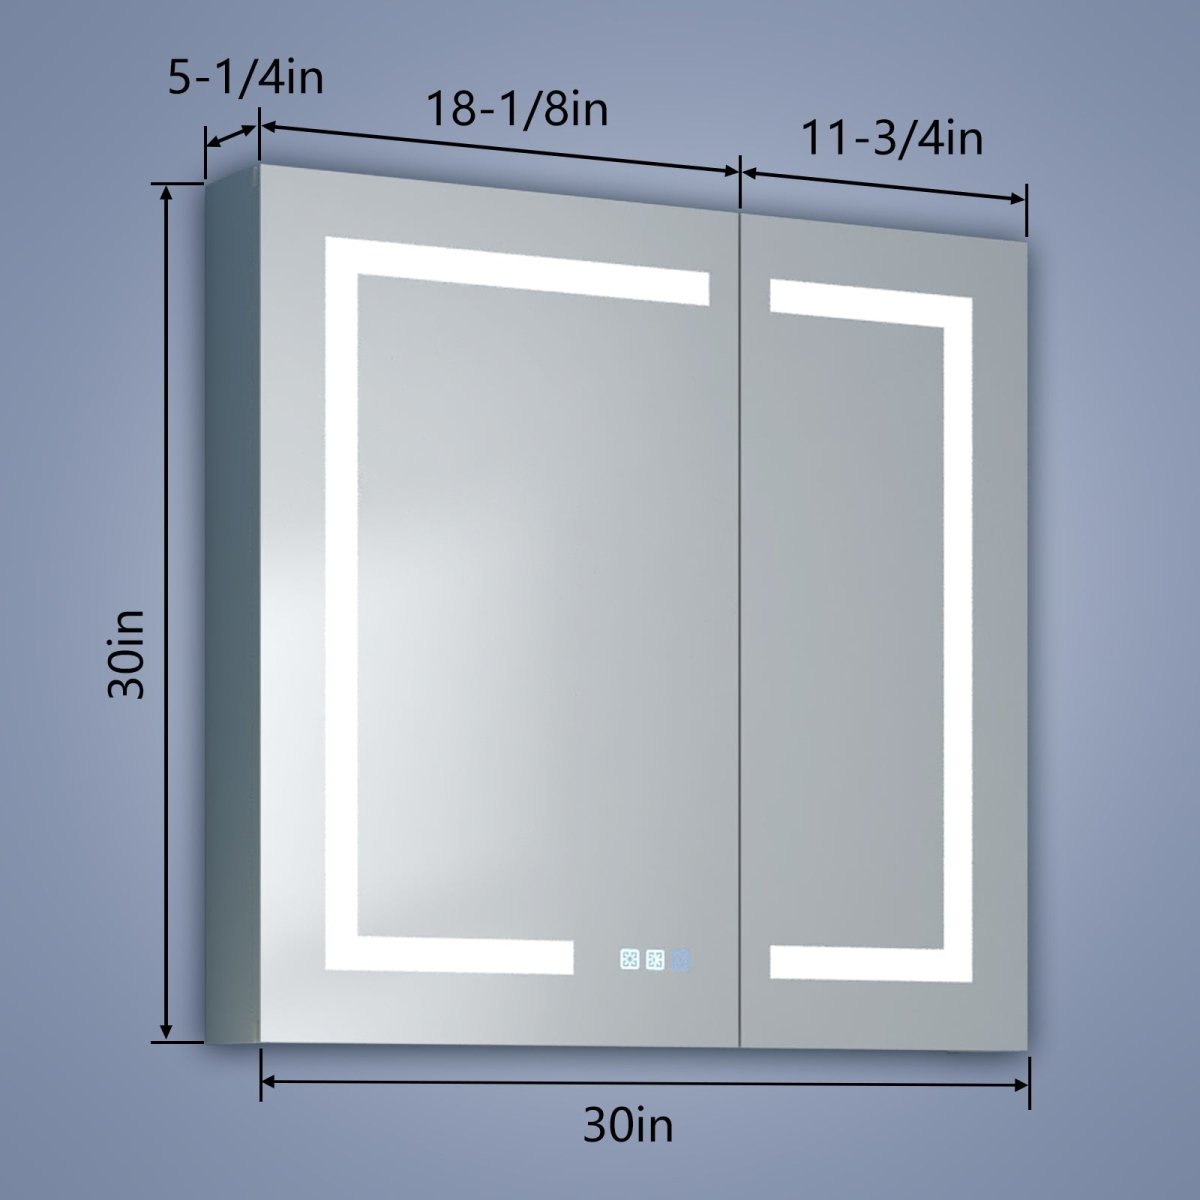 Boost-M1 30" W x 30" H Square Led Lighted Mirror Medicine Cabinet Recessed or Surface Mount,Defog